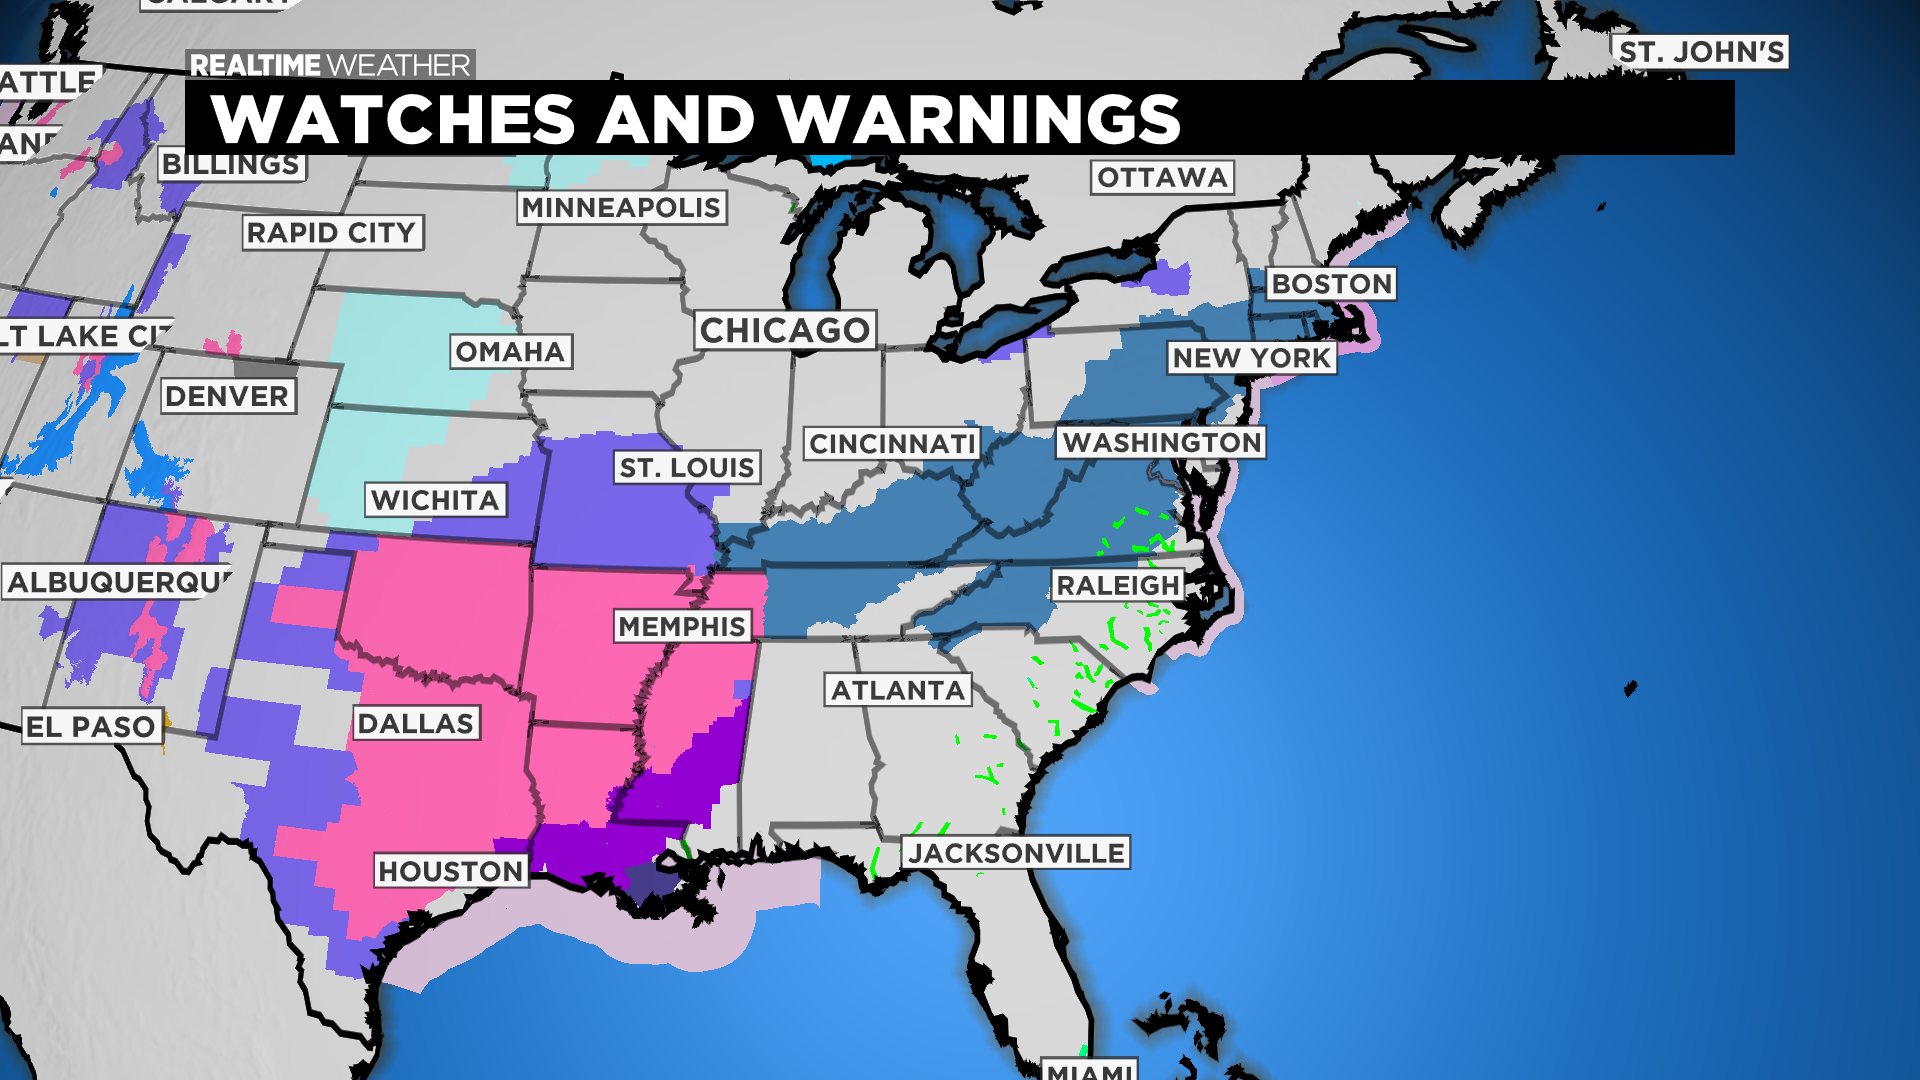 Watches And Warnings: 02.16.21